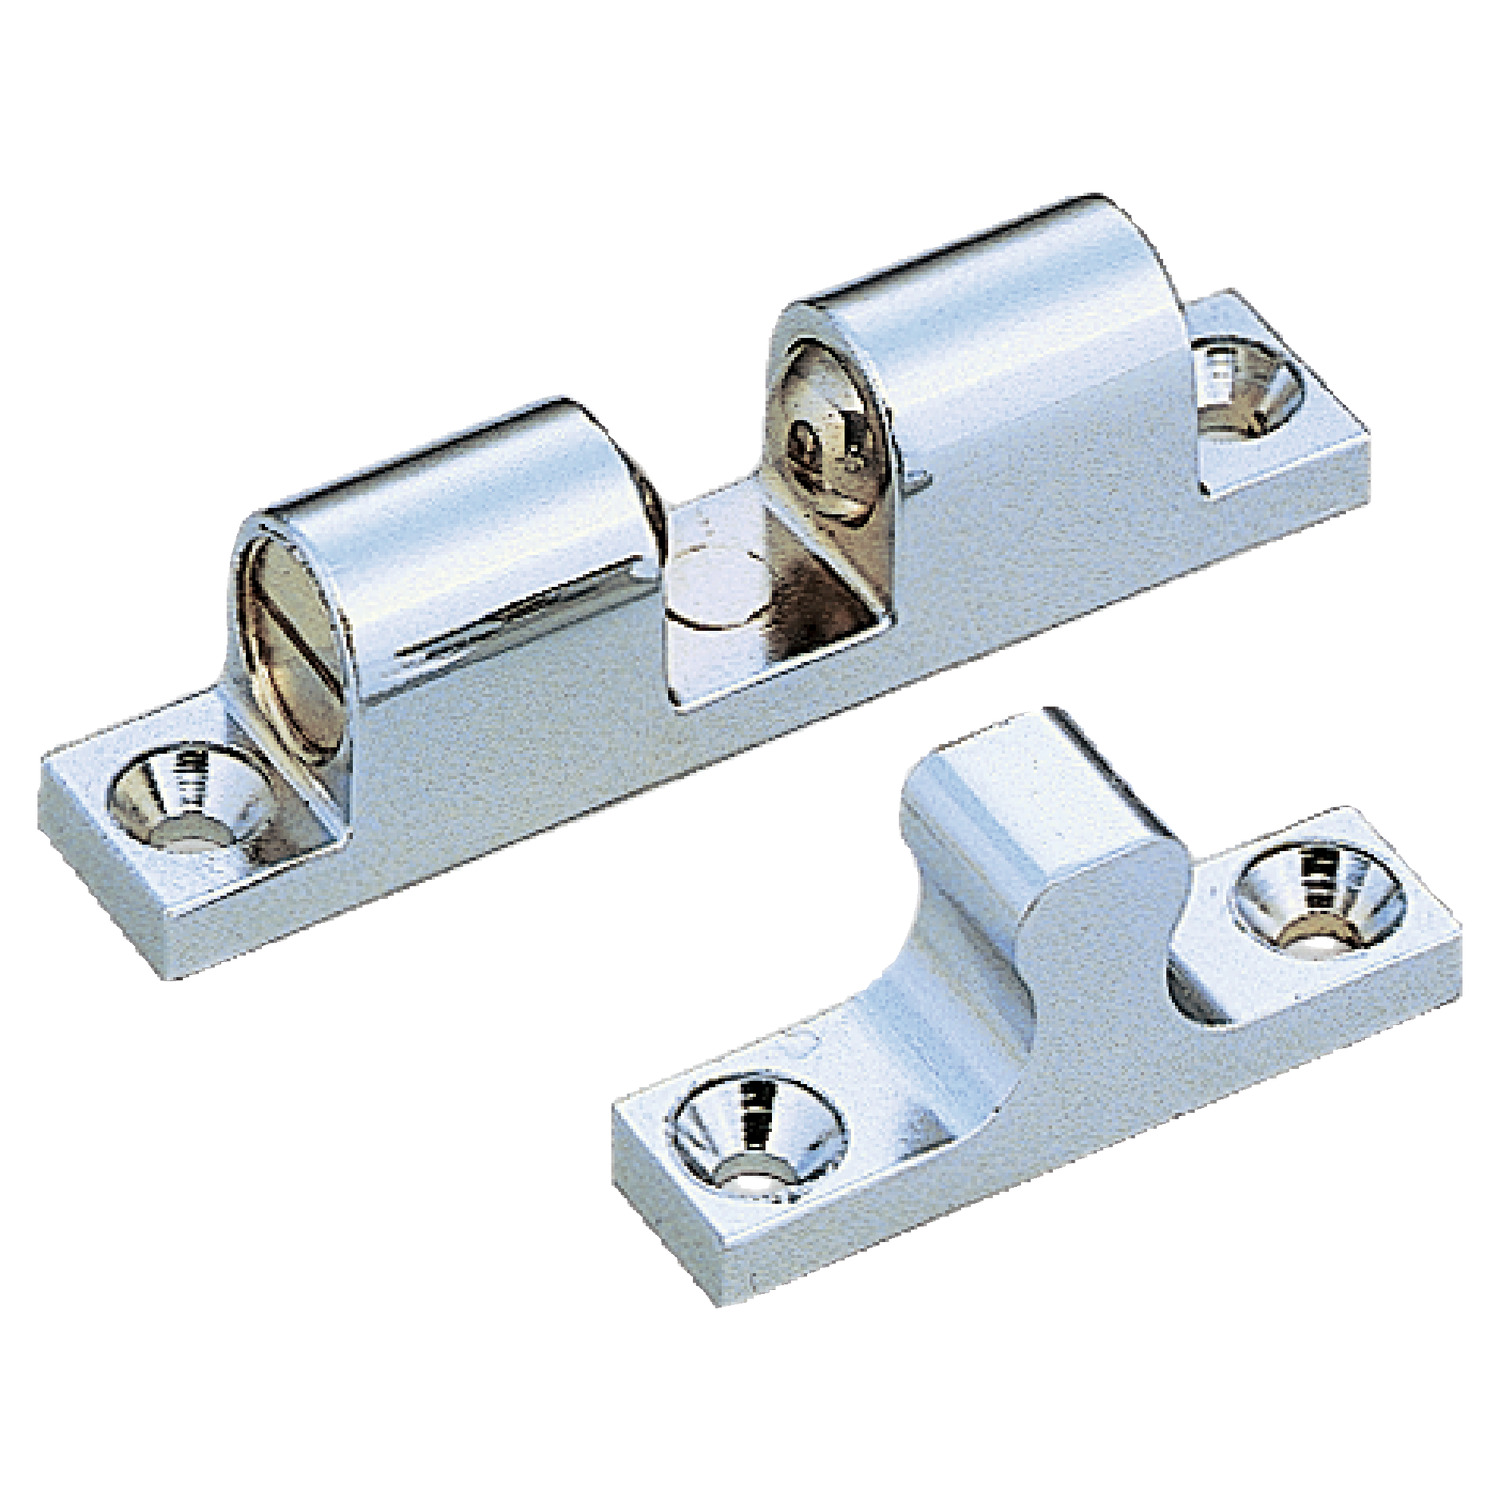 E4100.AC0070 Tension Catches Stainless Steel 70 - 51 - 13